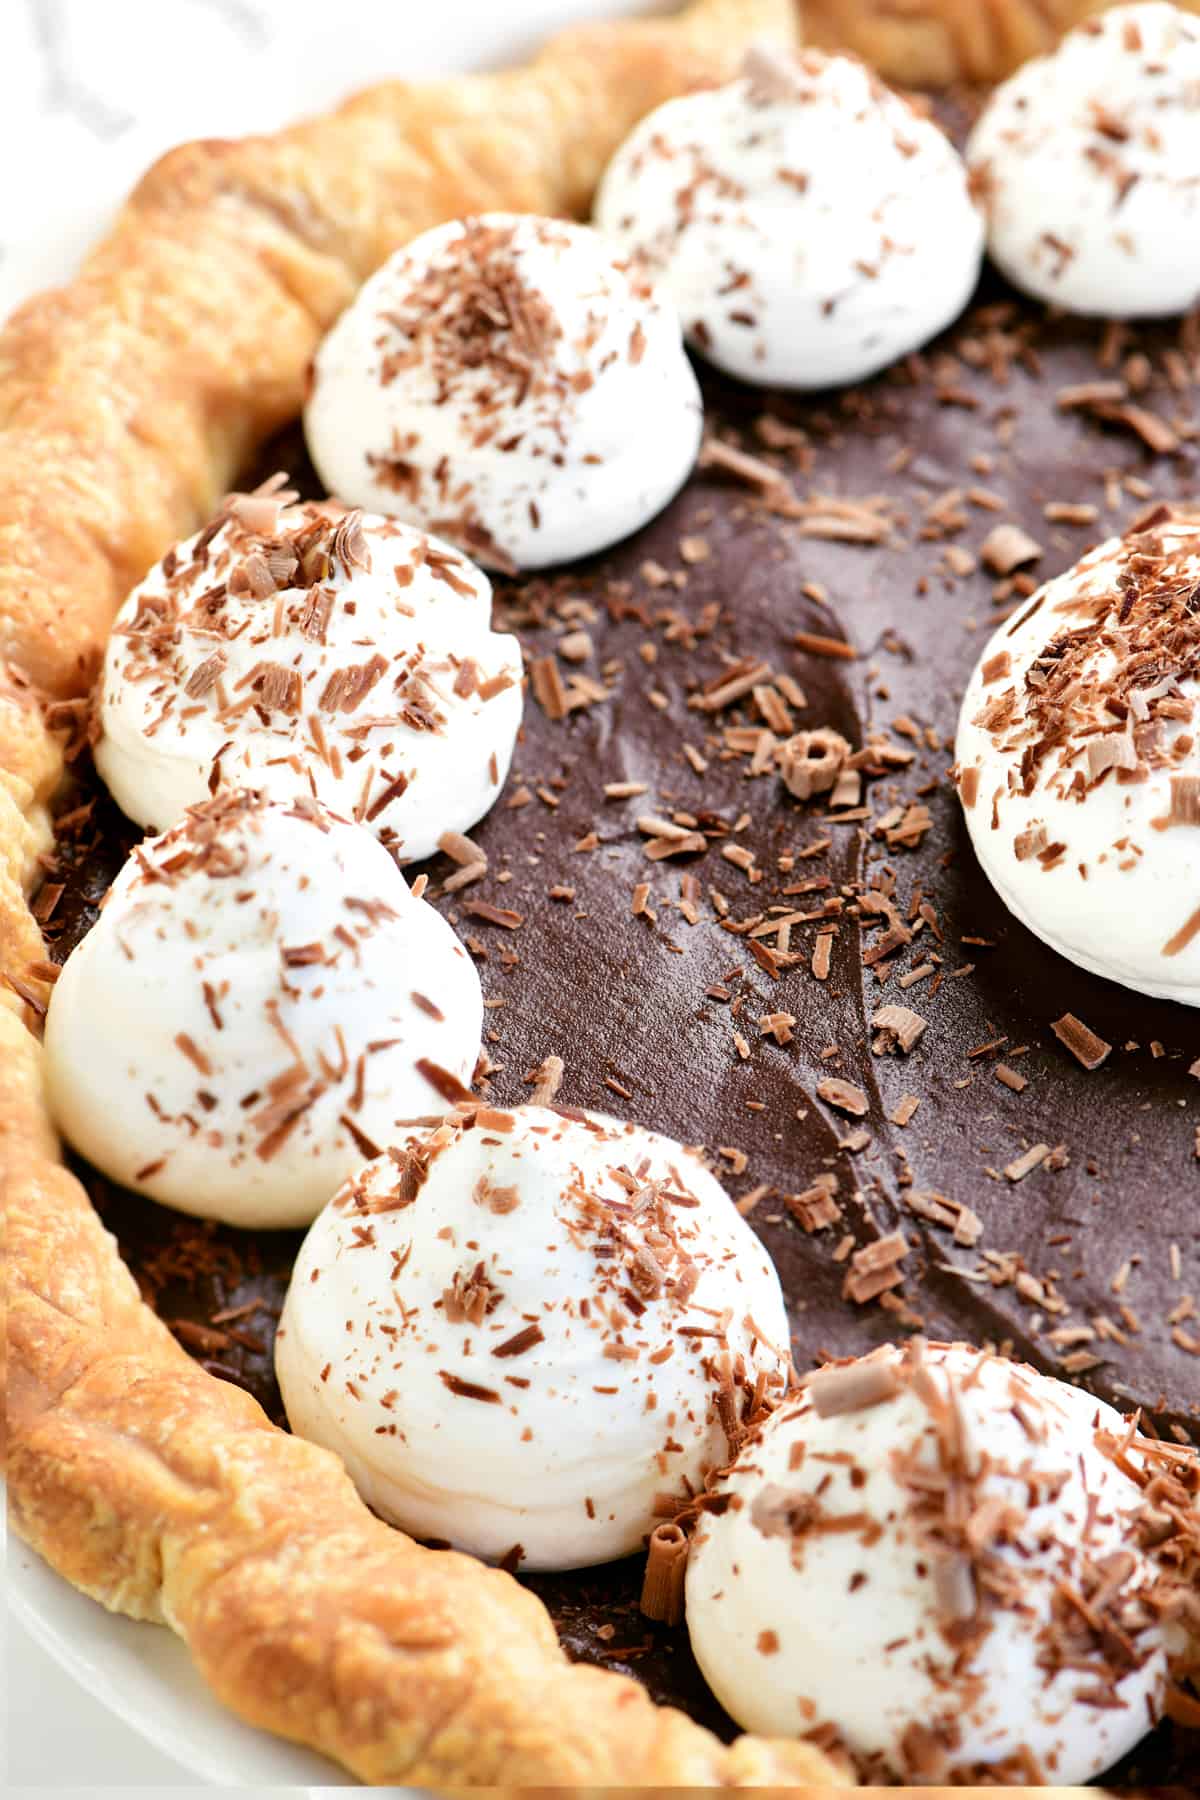 dollops of whipped cream on a chocolate pie